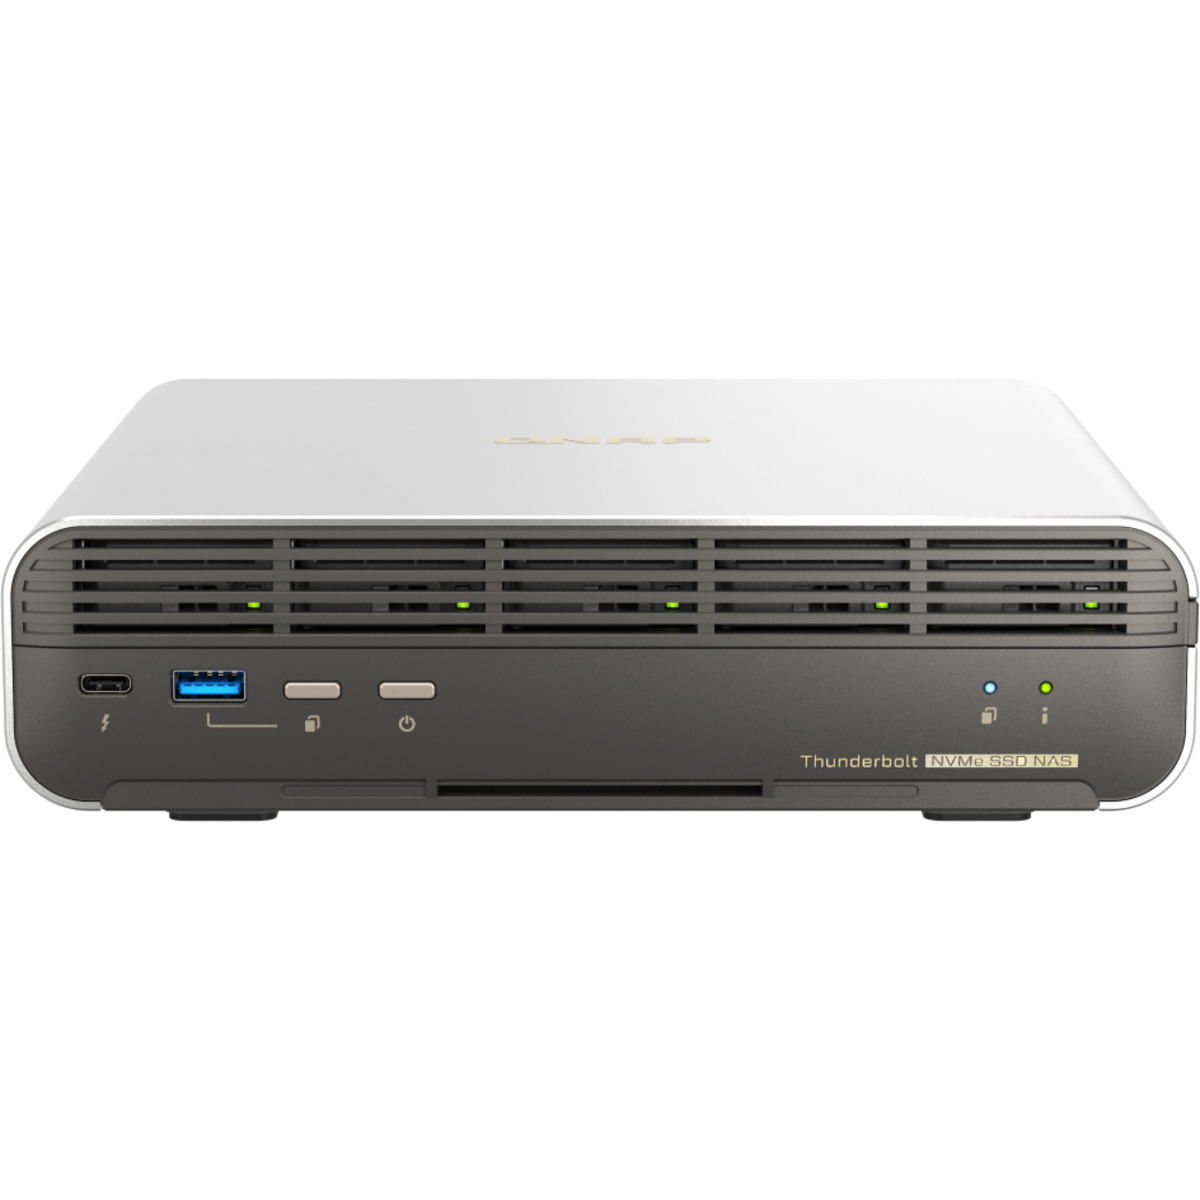 QNAP TBS-h574TX Core i5 Thunderbolt 4 40tb 5-Bay Desktop Multimedia / Power User / Business DAS-NAS - Combo Direct + Network Storage Device 5x8tb TeamGroup MP44 TM8FPW008T0C101  7200/6000MB/s M.2 2280 NVMe SSD CONSUMER Class Drives Installed - Burn-In Tested TBS-h574TX Core i5 Thunderbolt 4